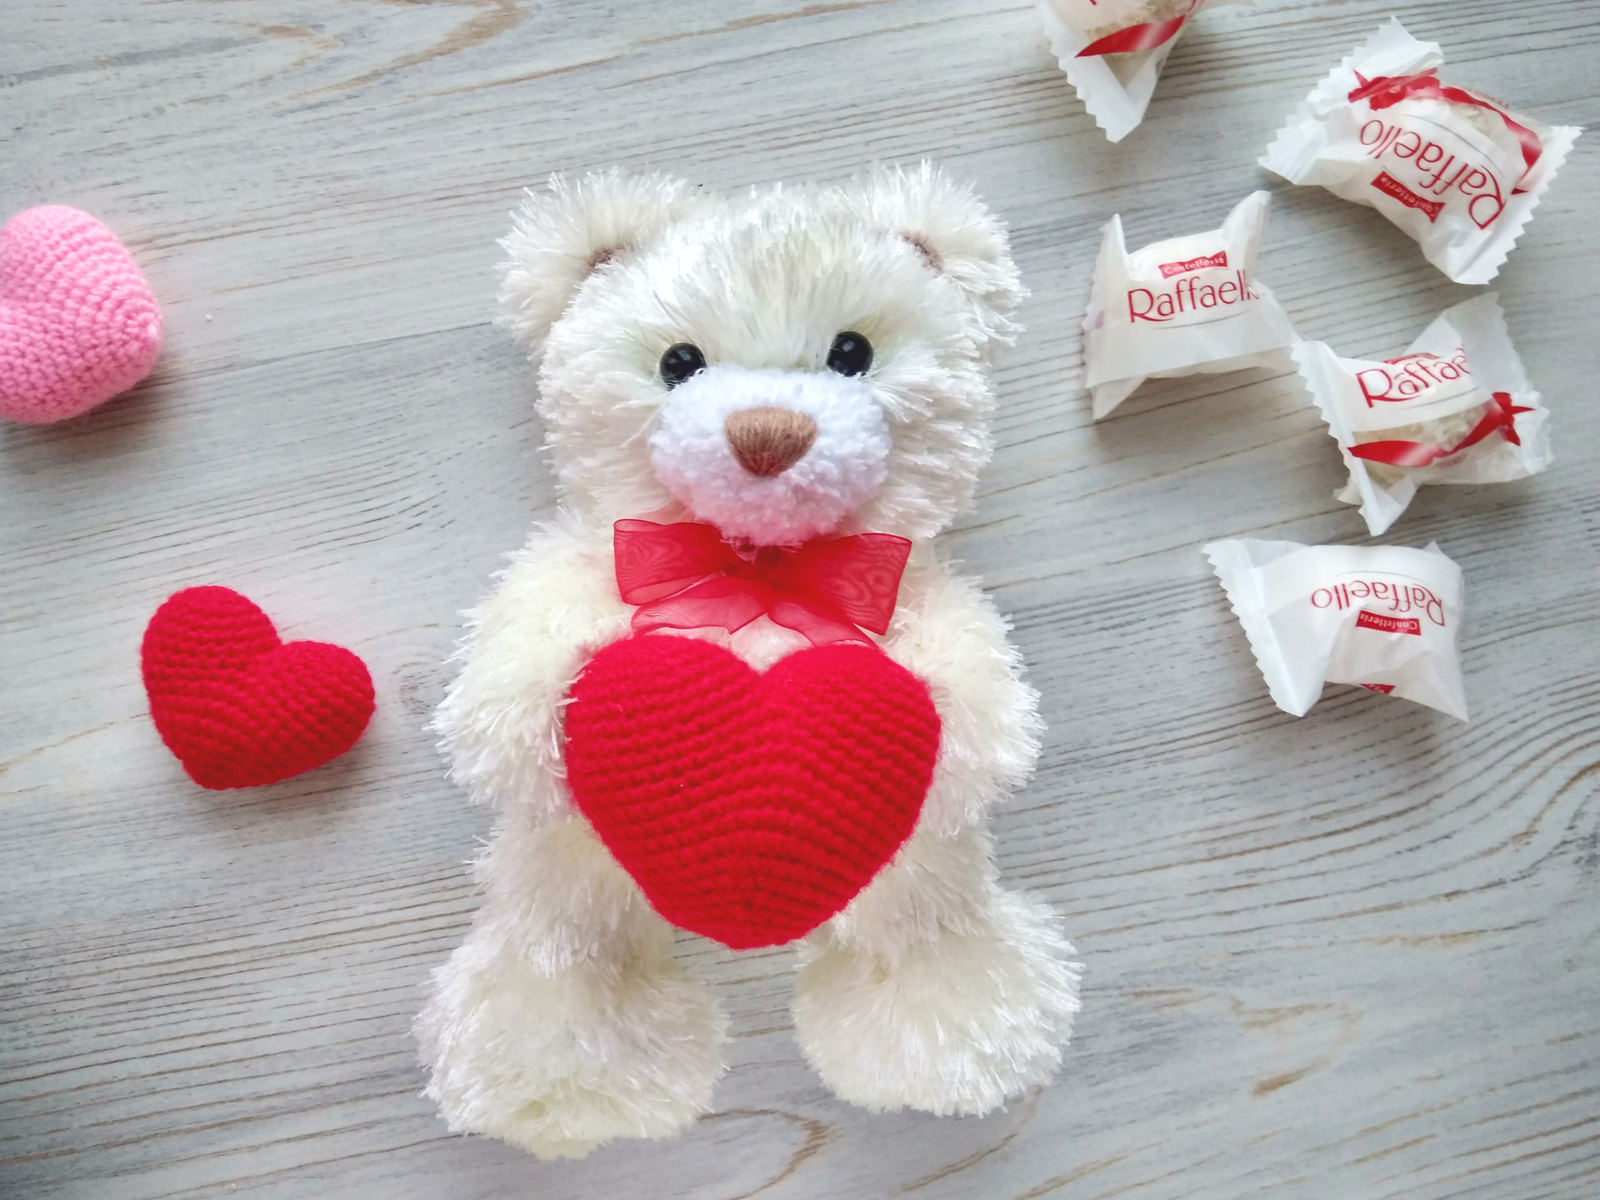 Knitted bear with a heart - My, Needlework without process, Needlework, Handmade, With your own hands, Bear, Teddy bear, Valentine's Day, Longpost, The Bears